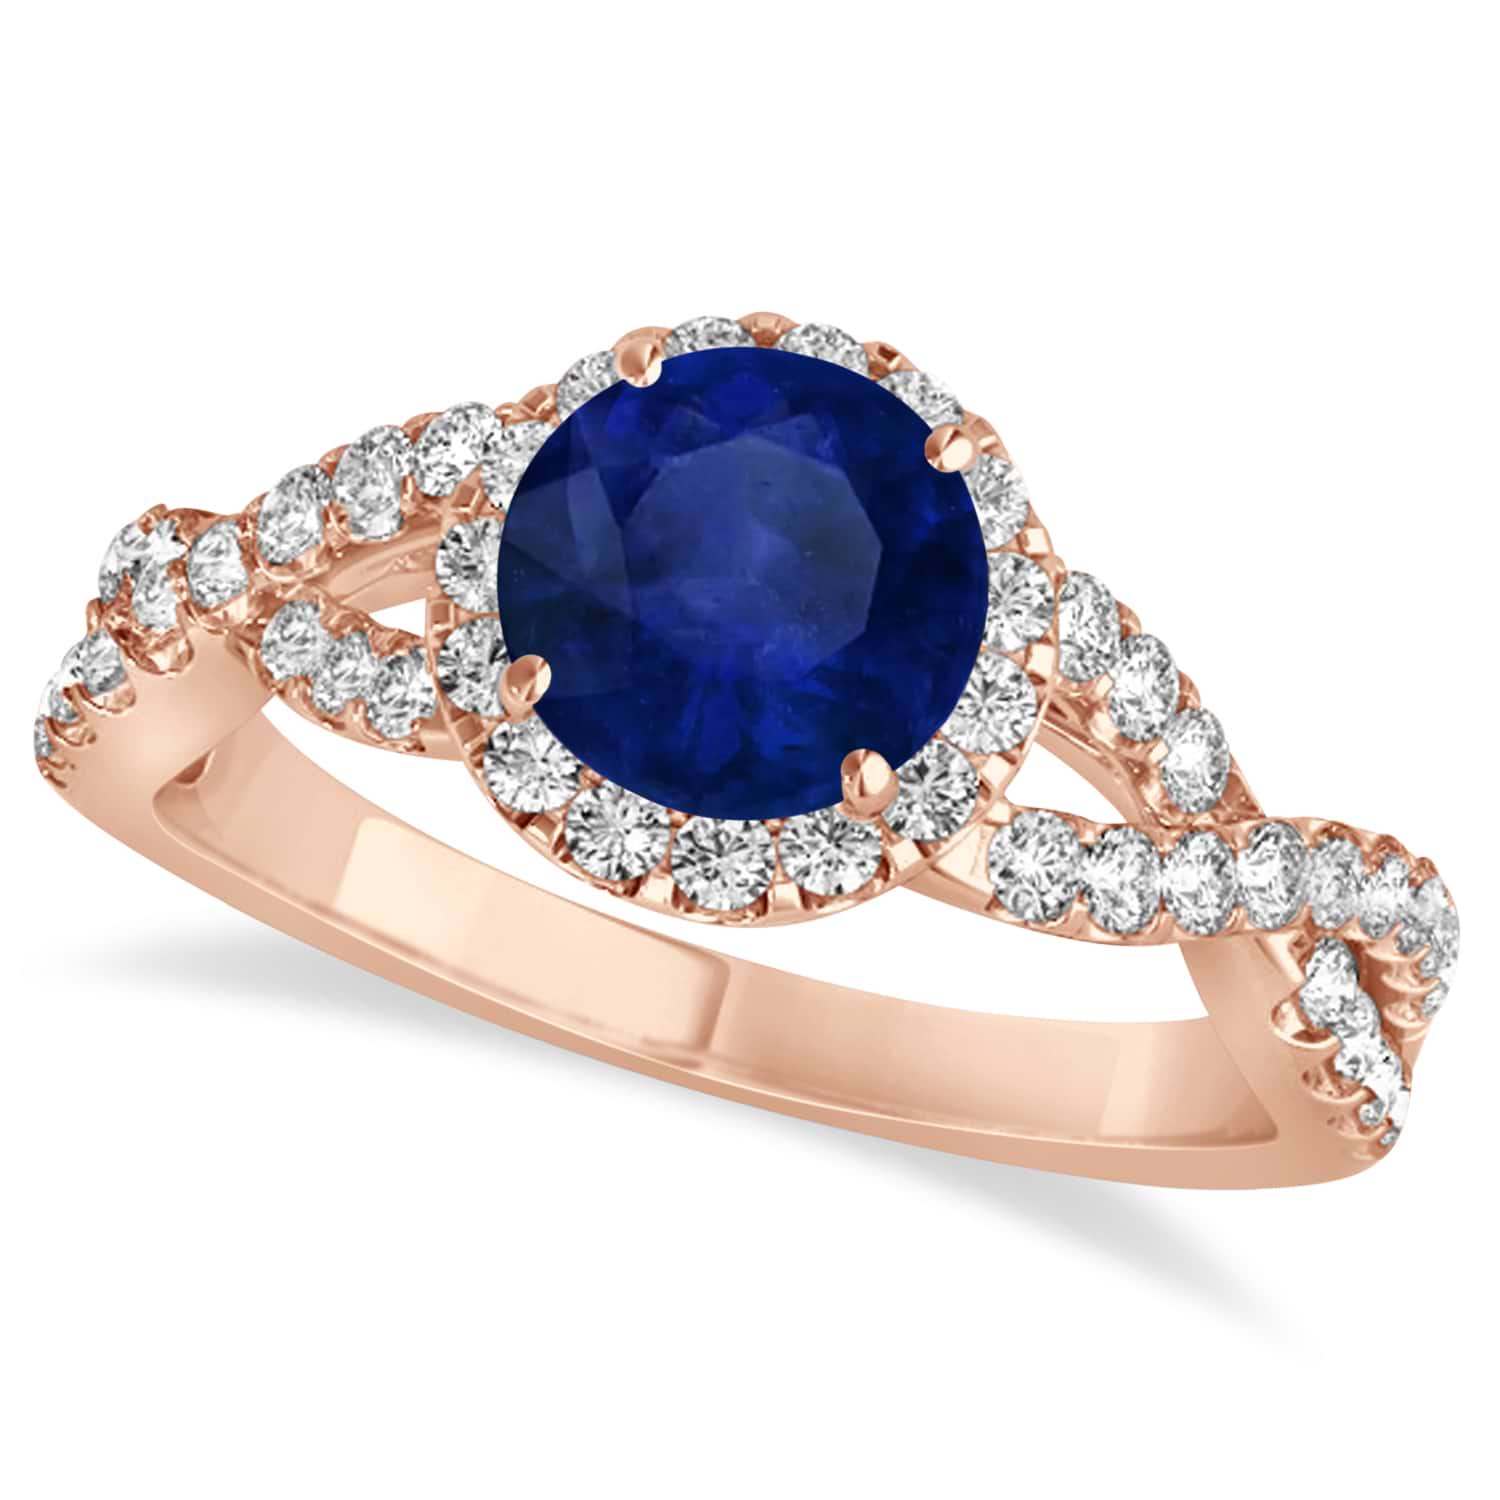 Blue Sapphire & Diamond Twisted Engagement Ring 18k Rose Gold 1.55ct